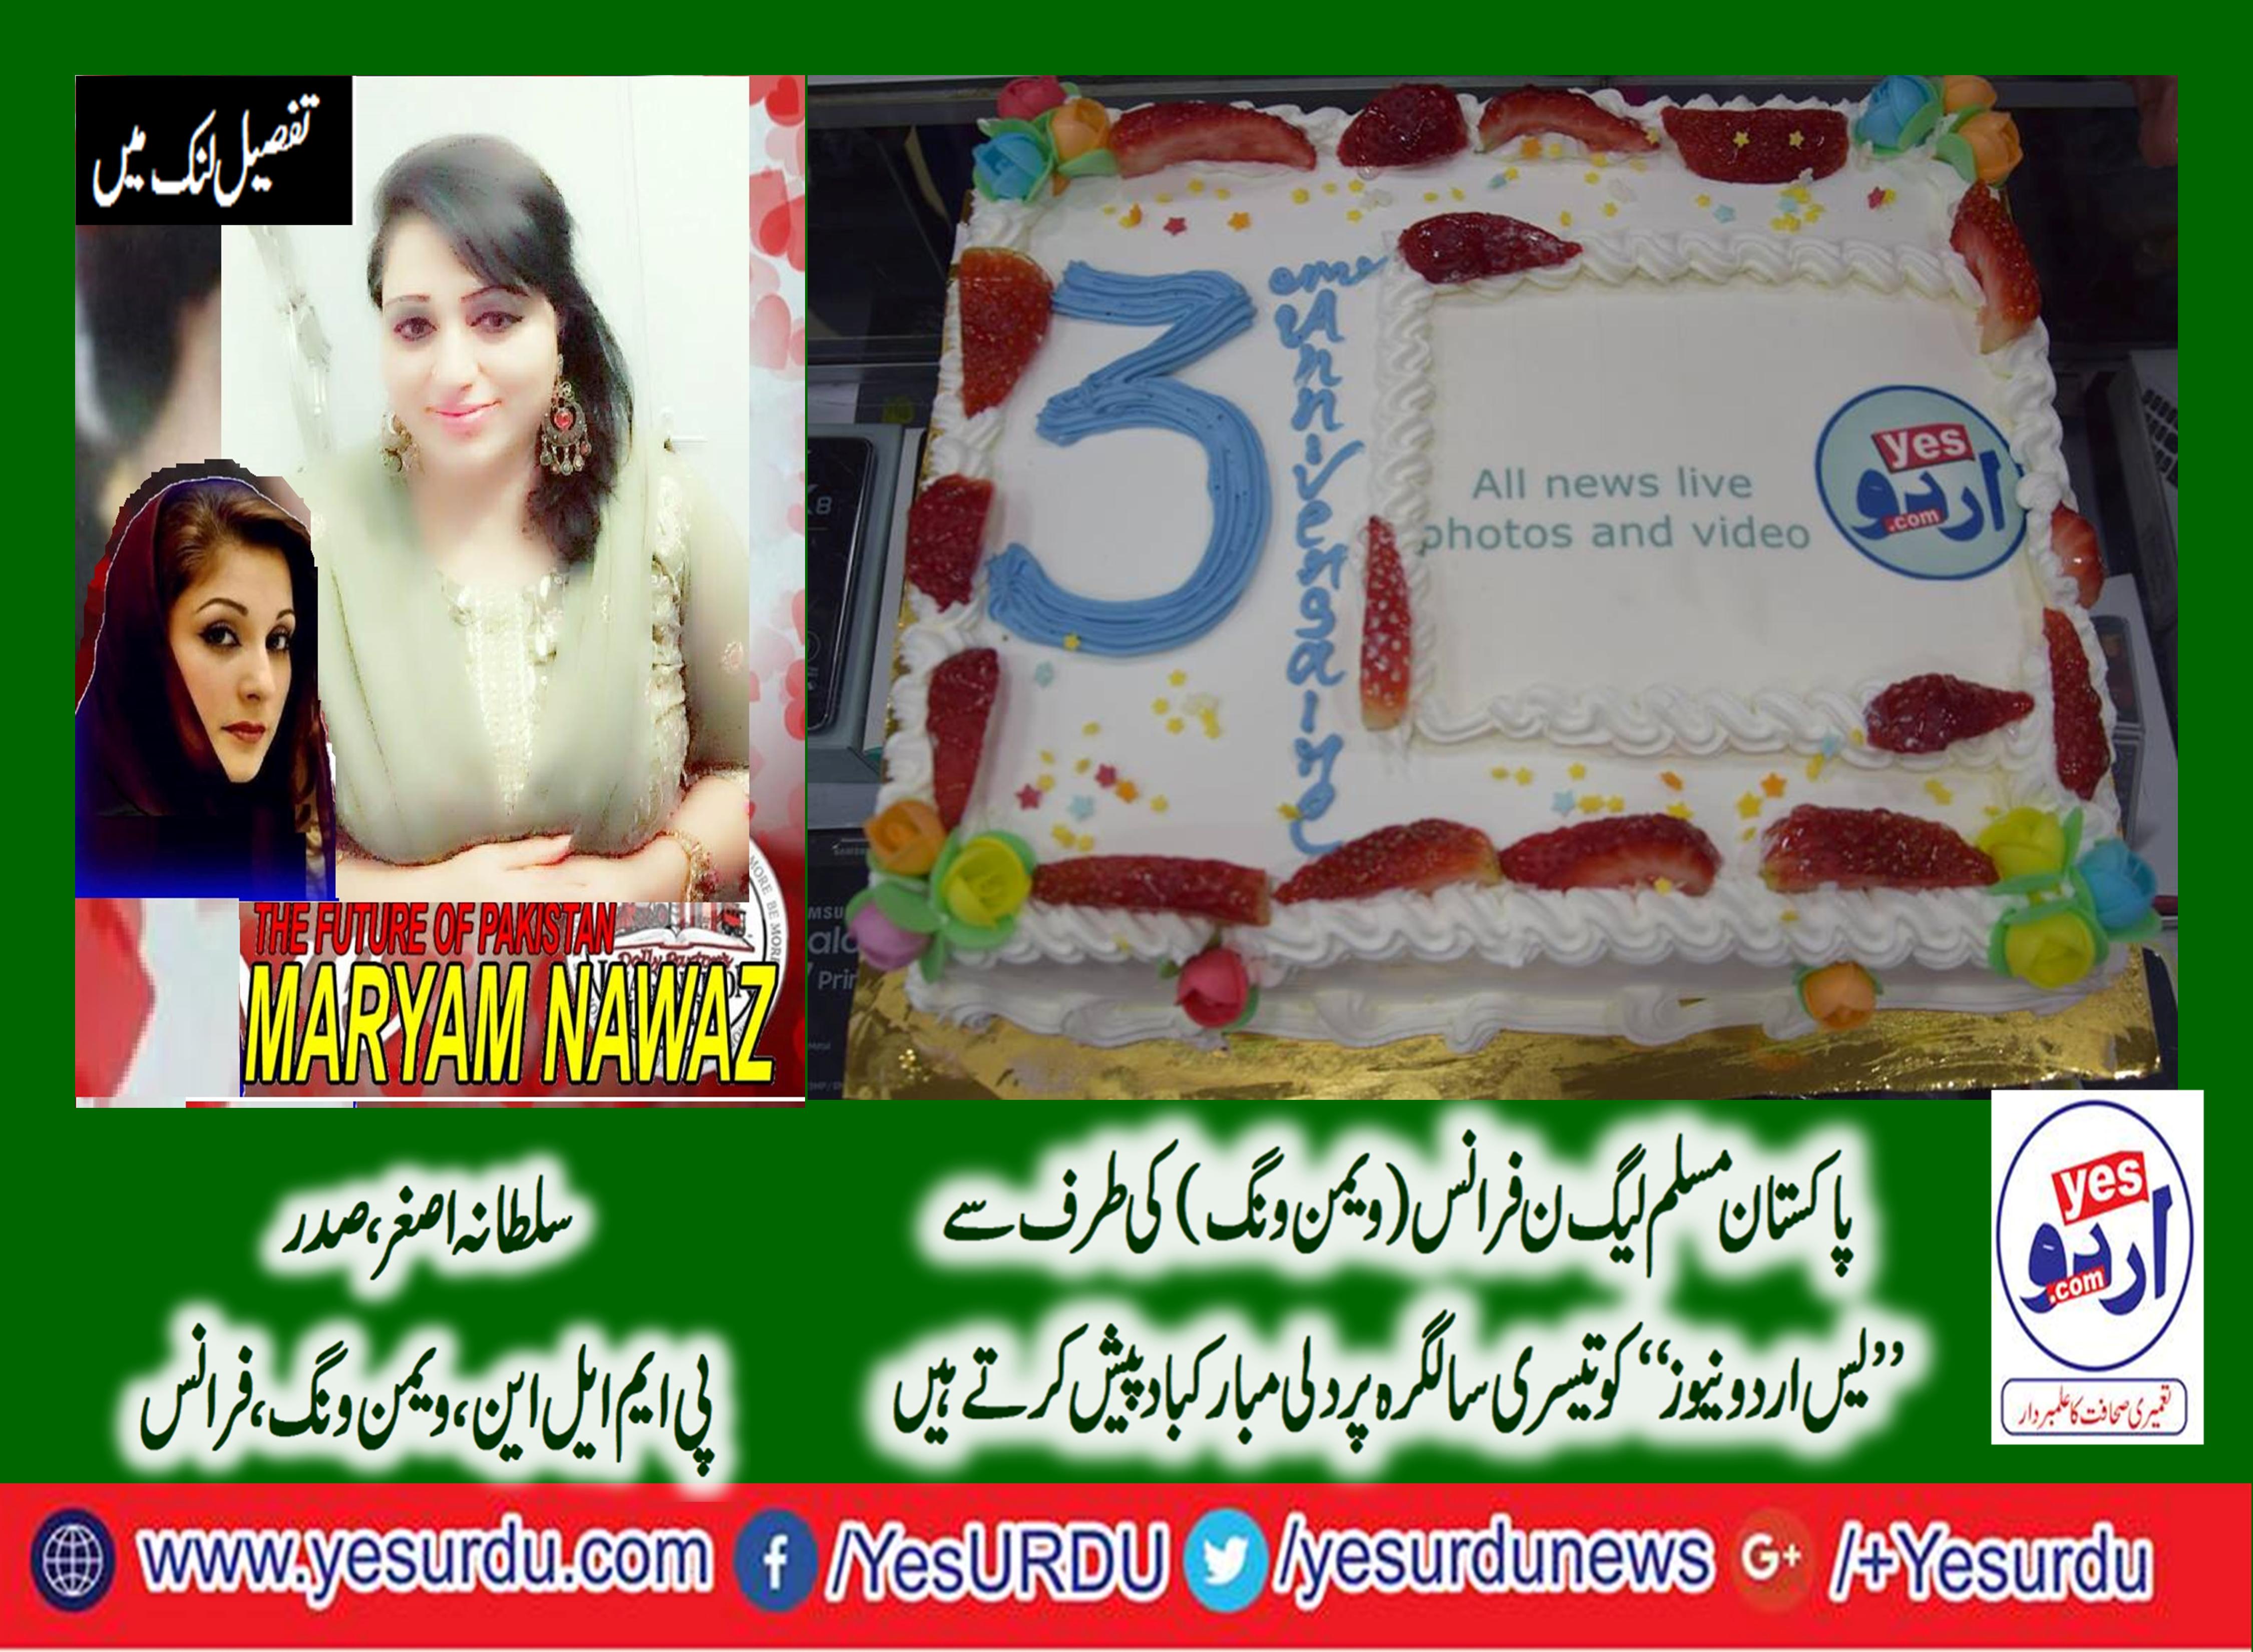 SULTANA ASGHAR, PRESIDENT, PMLN, WOMEN, WING, CONGRATULATED, THE, YESURDU, NEWS, FOR, ITS, 3RD, ANNIVERSARY